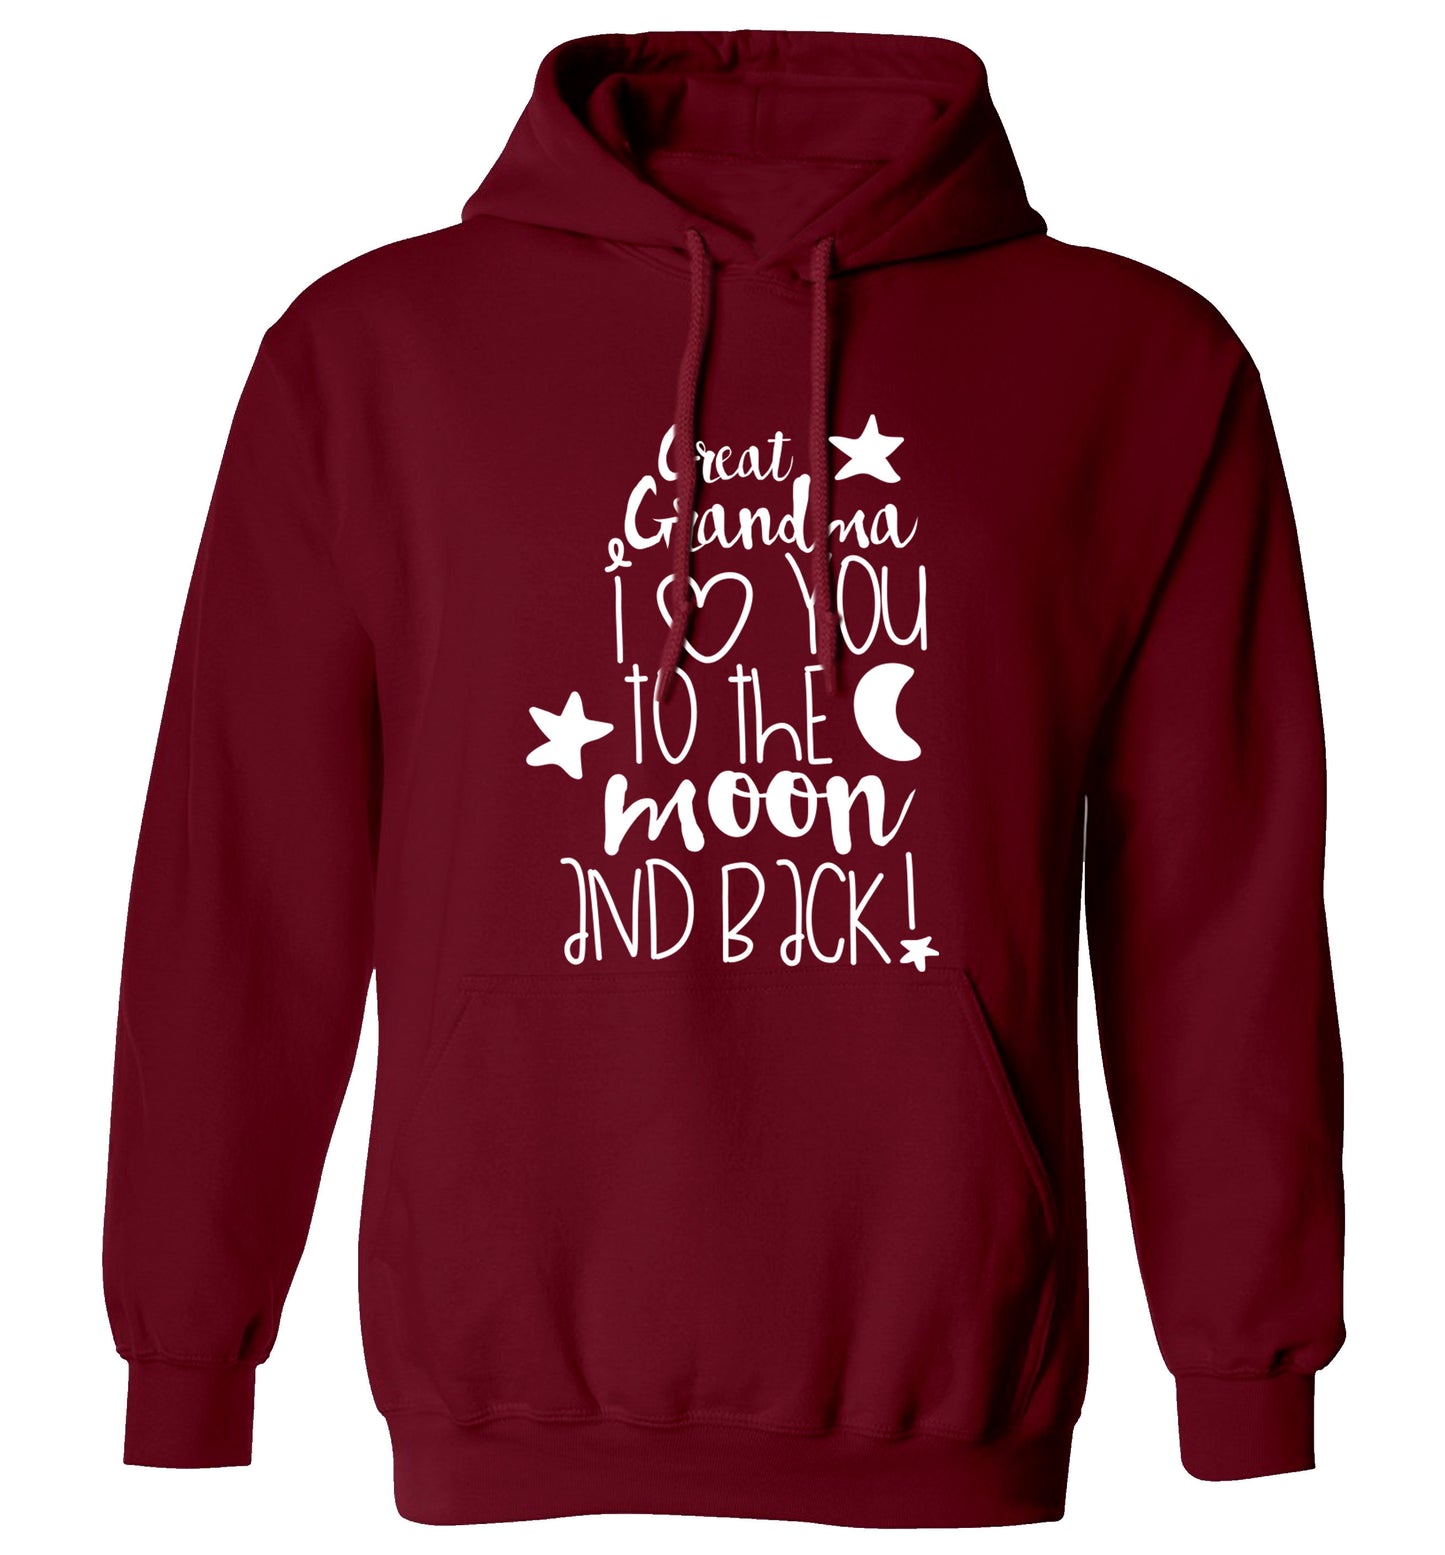 Great Grandma I love you to the moon and back adults unisex maroon hoodie 2XL